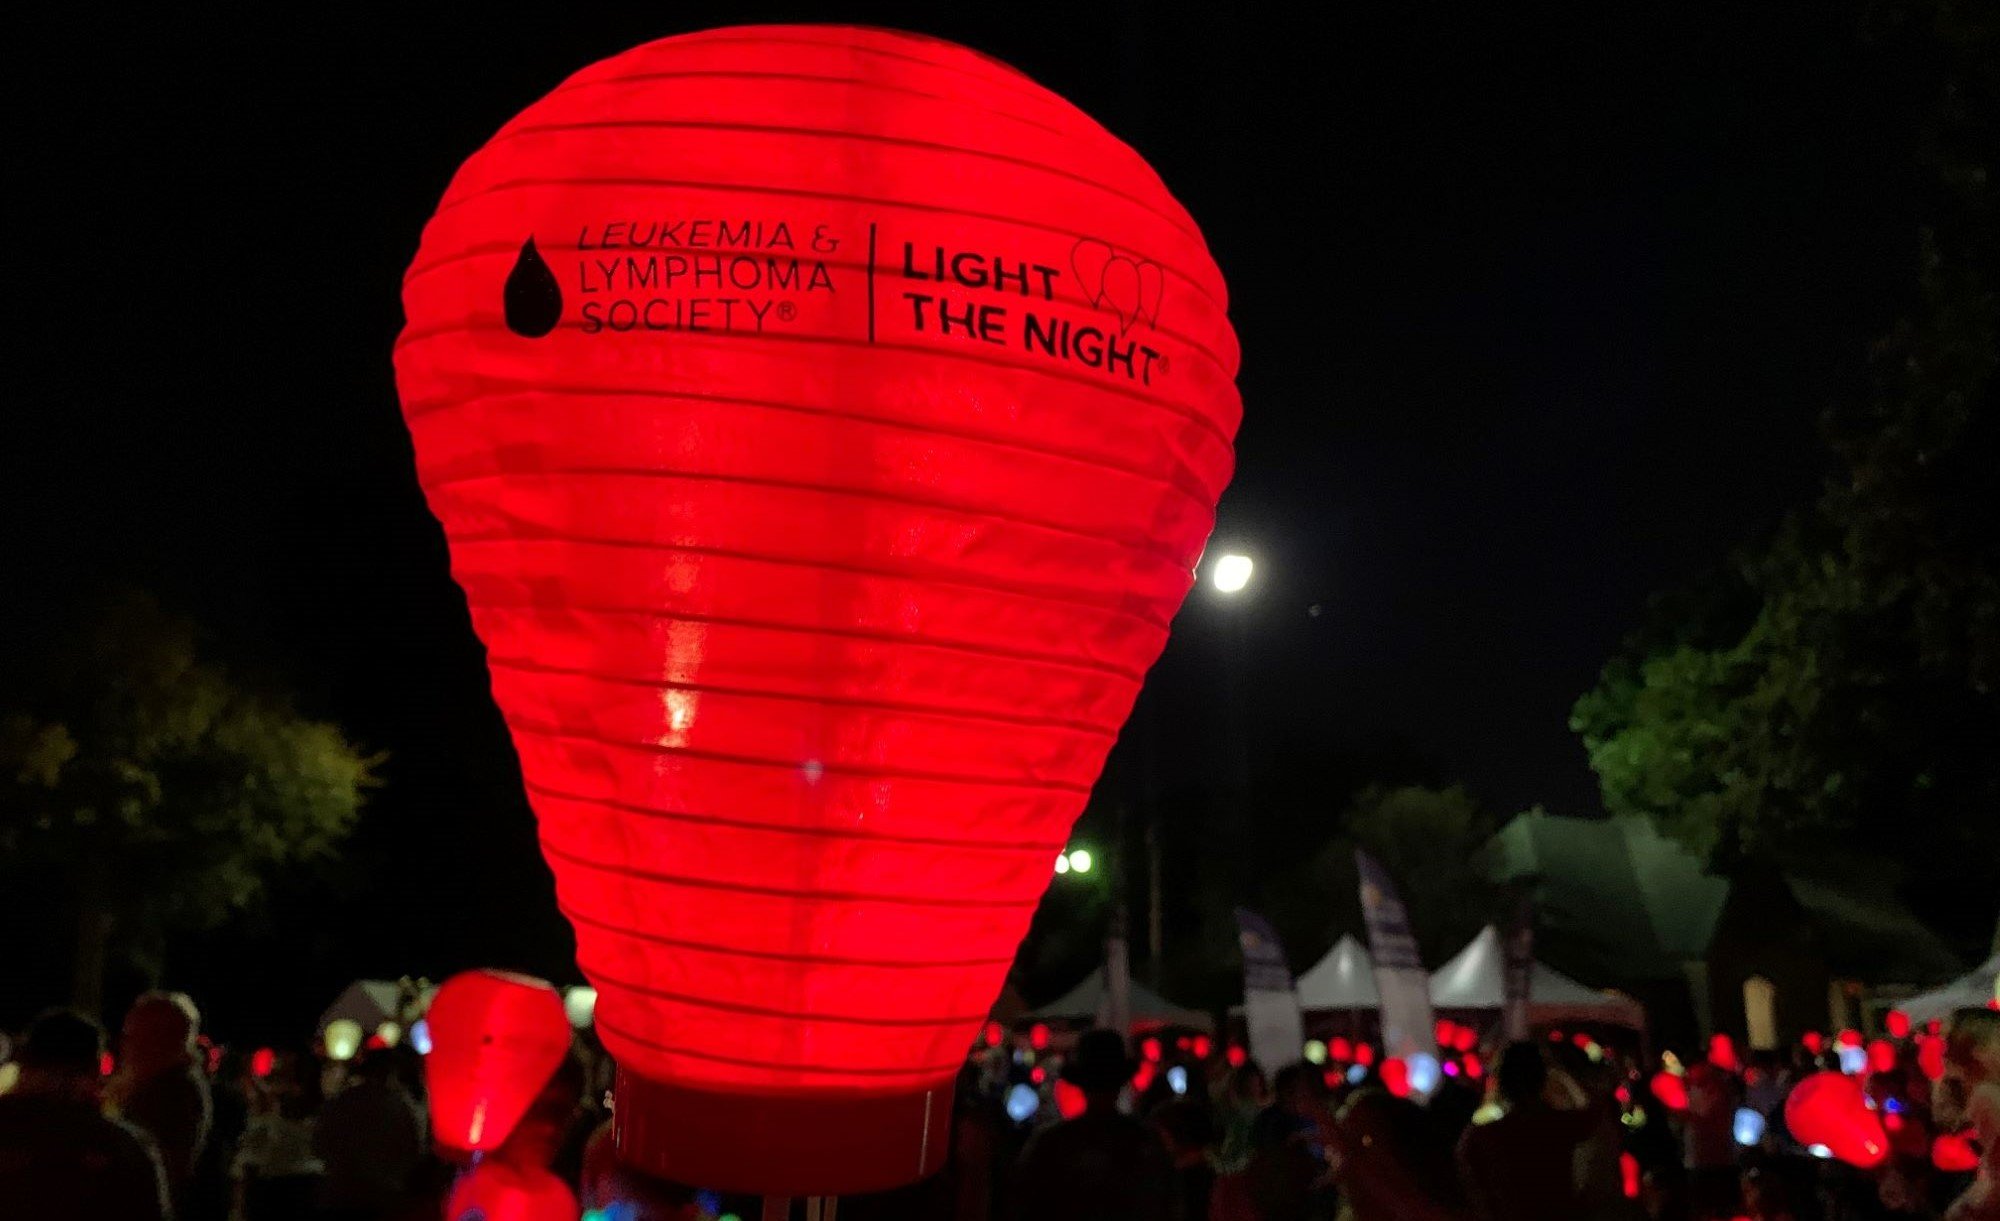 Elbit America employees take part in Light The Night in Tarrant County